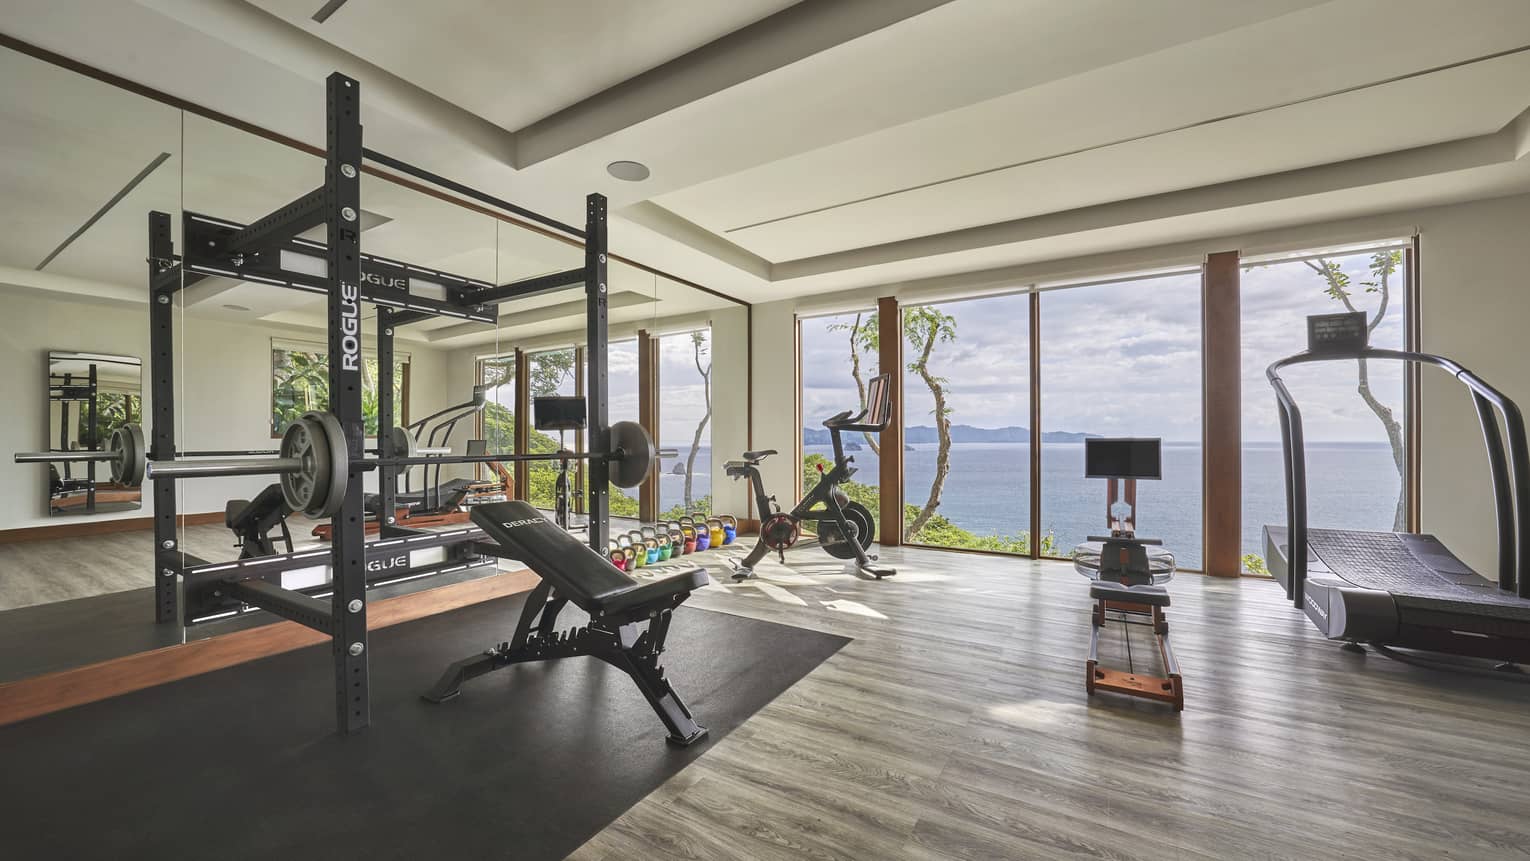 Private gym with grey wooden floors, weight and cardio machines, and wall of windows overlooking the sea